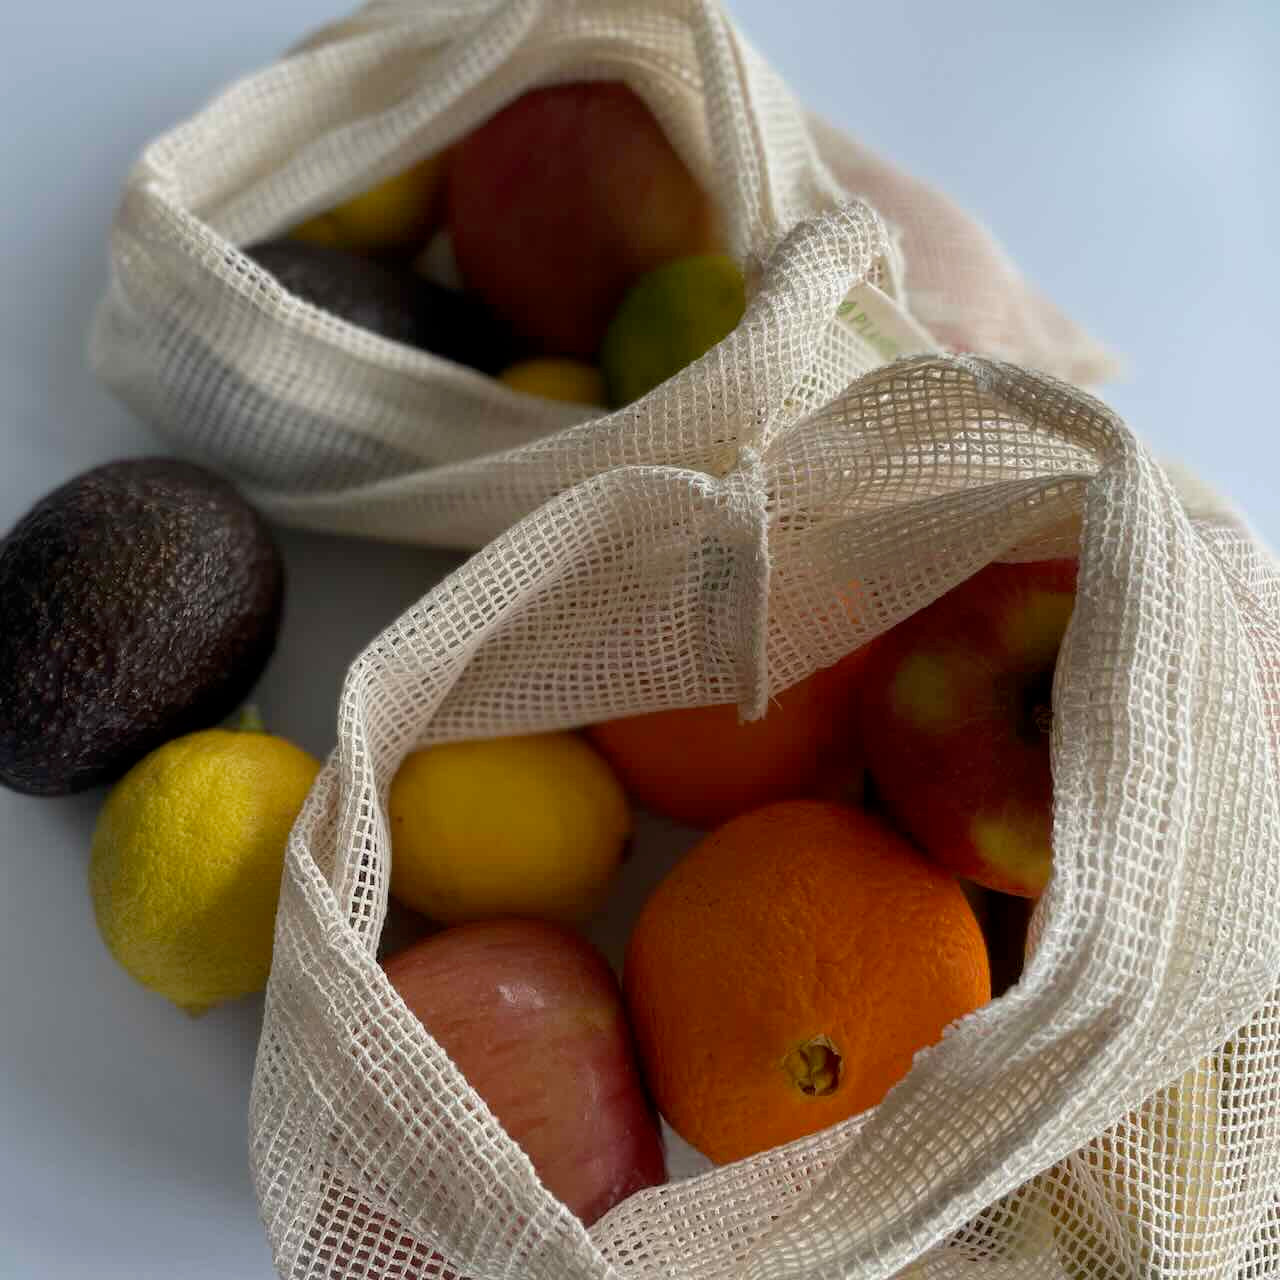 insides of mesh bags with fruits